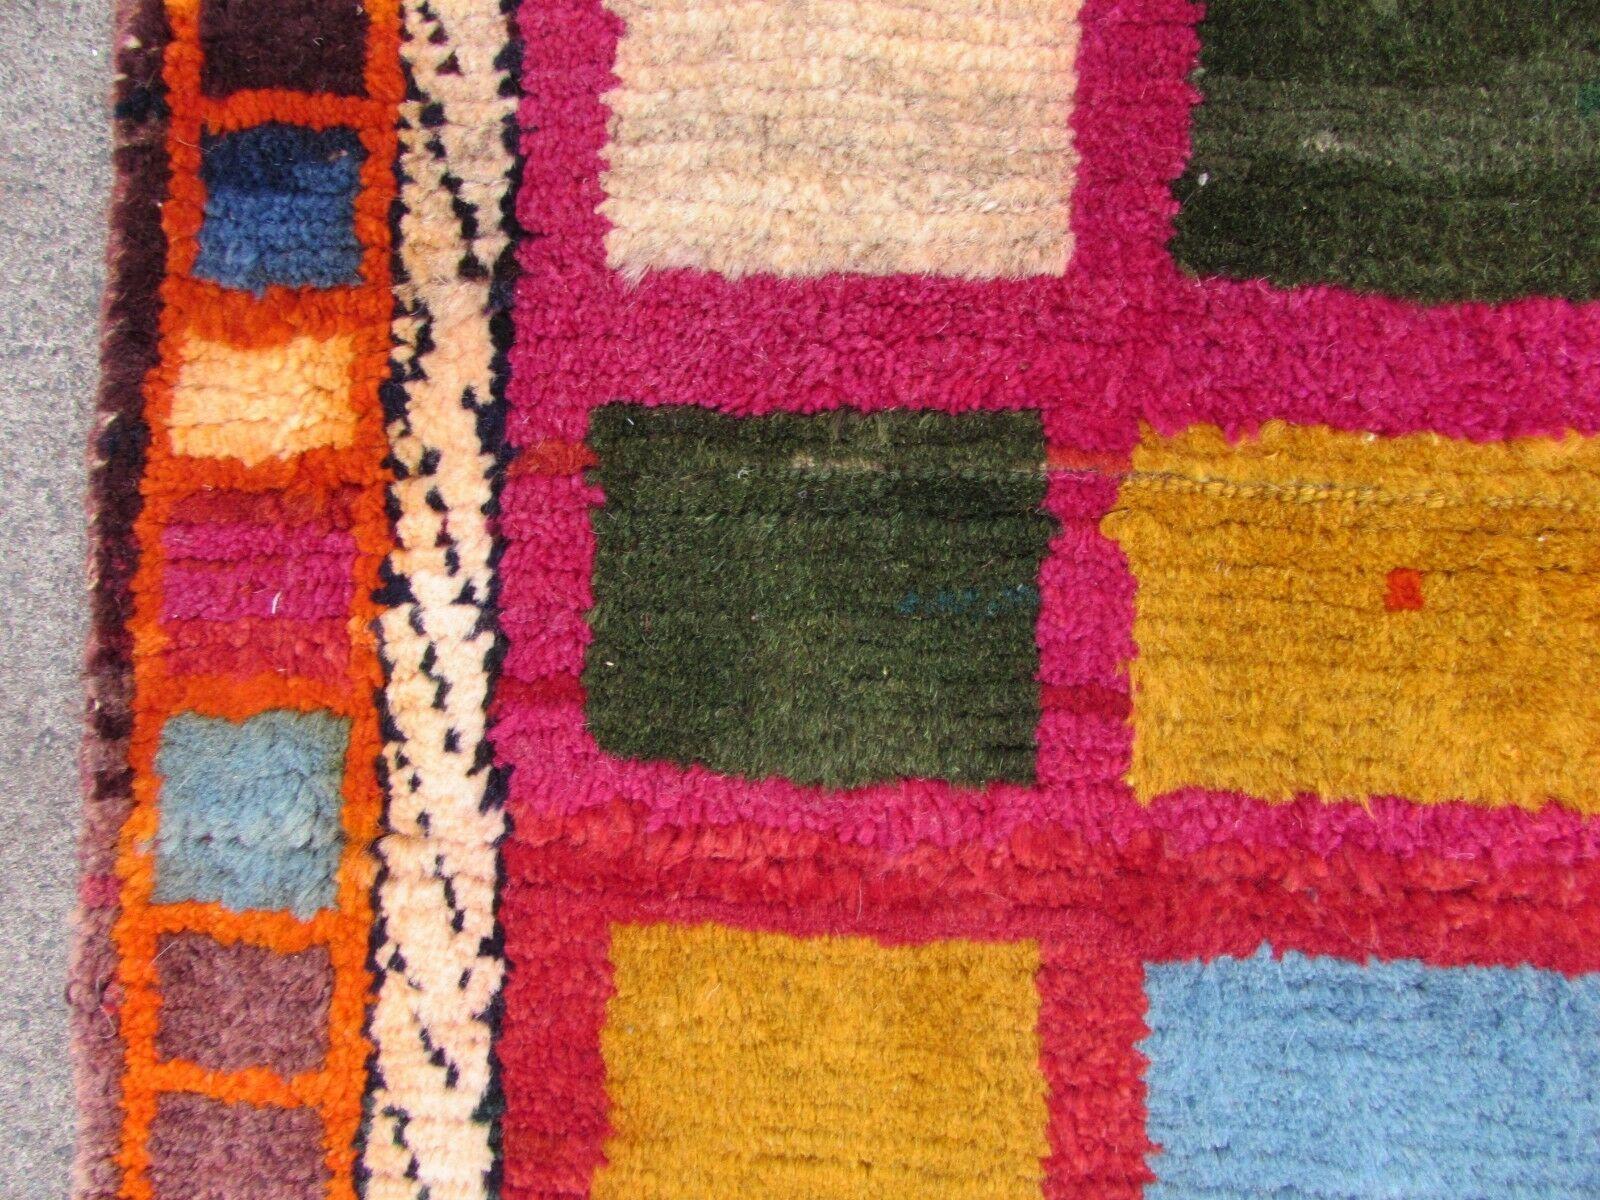 Handmade vintage Gabbeh rug in colorful wool. The rug is from the end of 20th century in original good condition.

-condition: original good,

-circa: 1980s,

-size: 3.6' x 5.7' (110cm x 175cm),

-material: wool,

-country of origin: